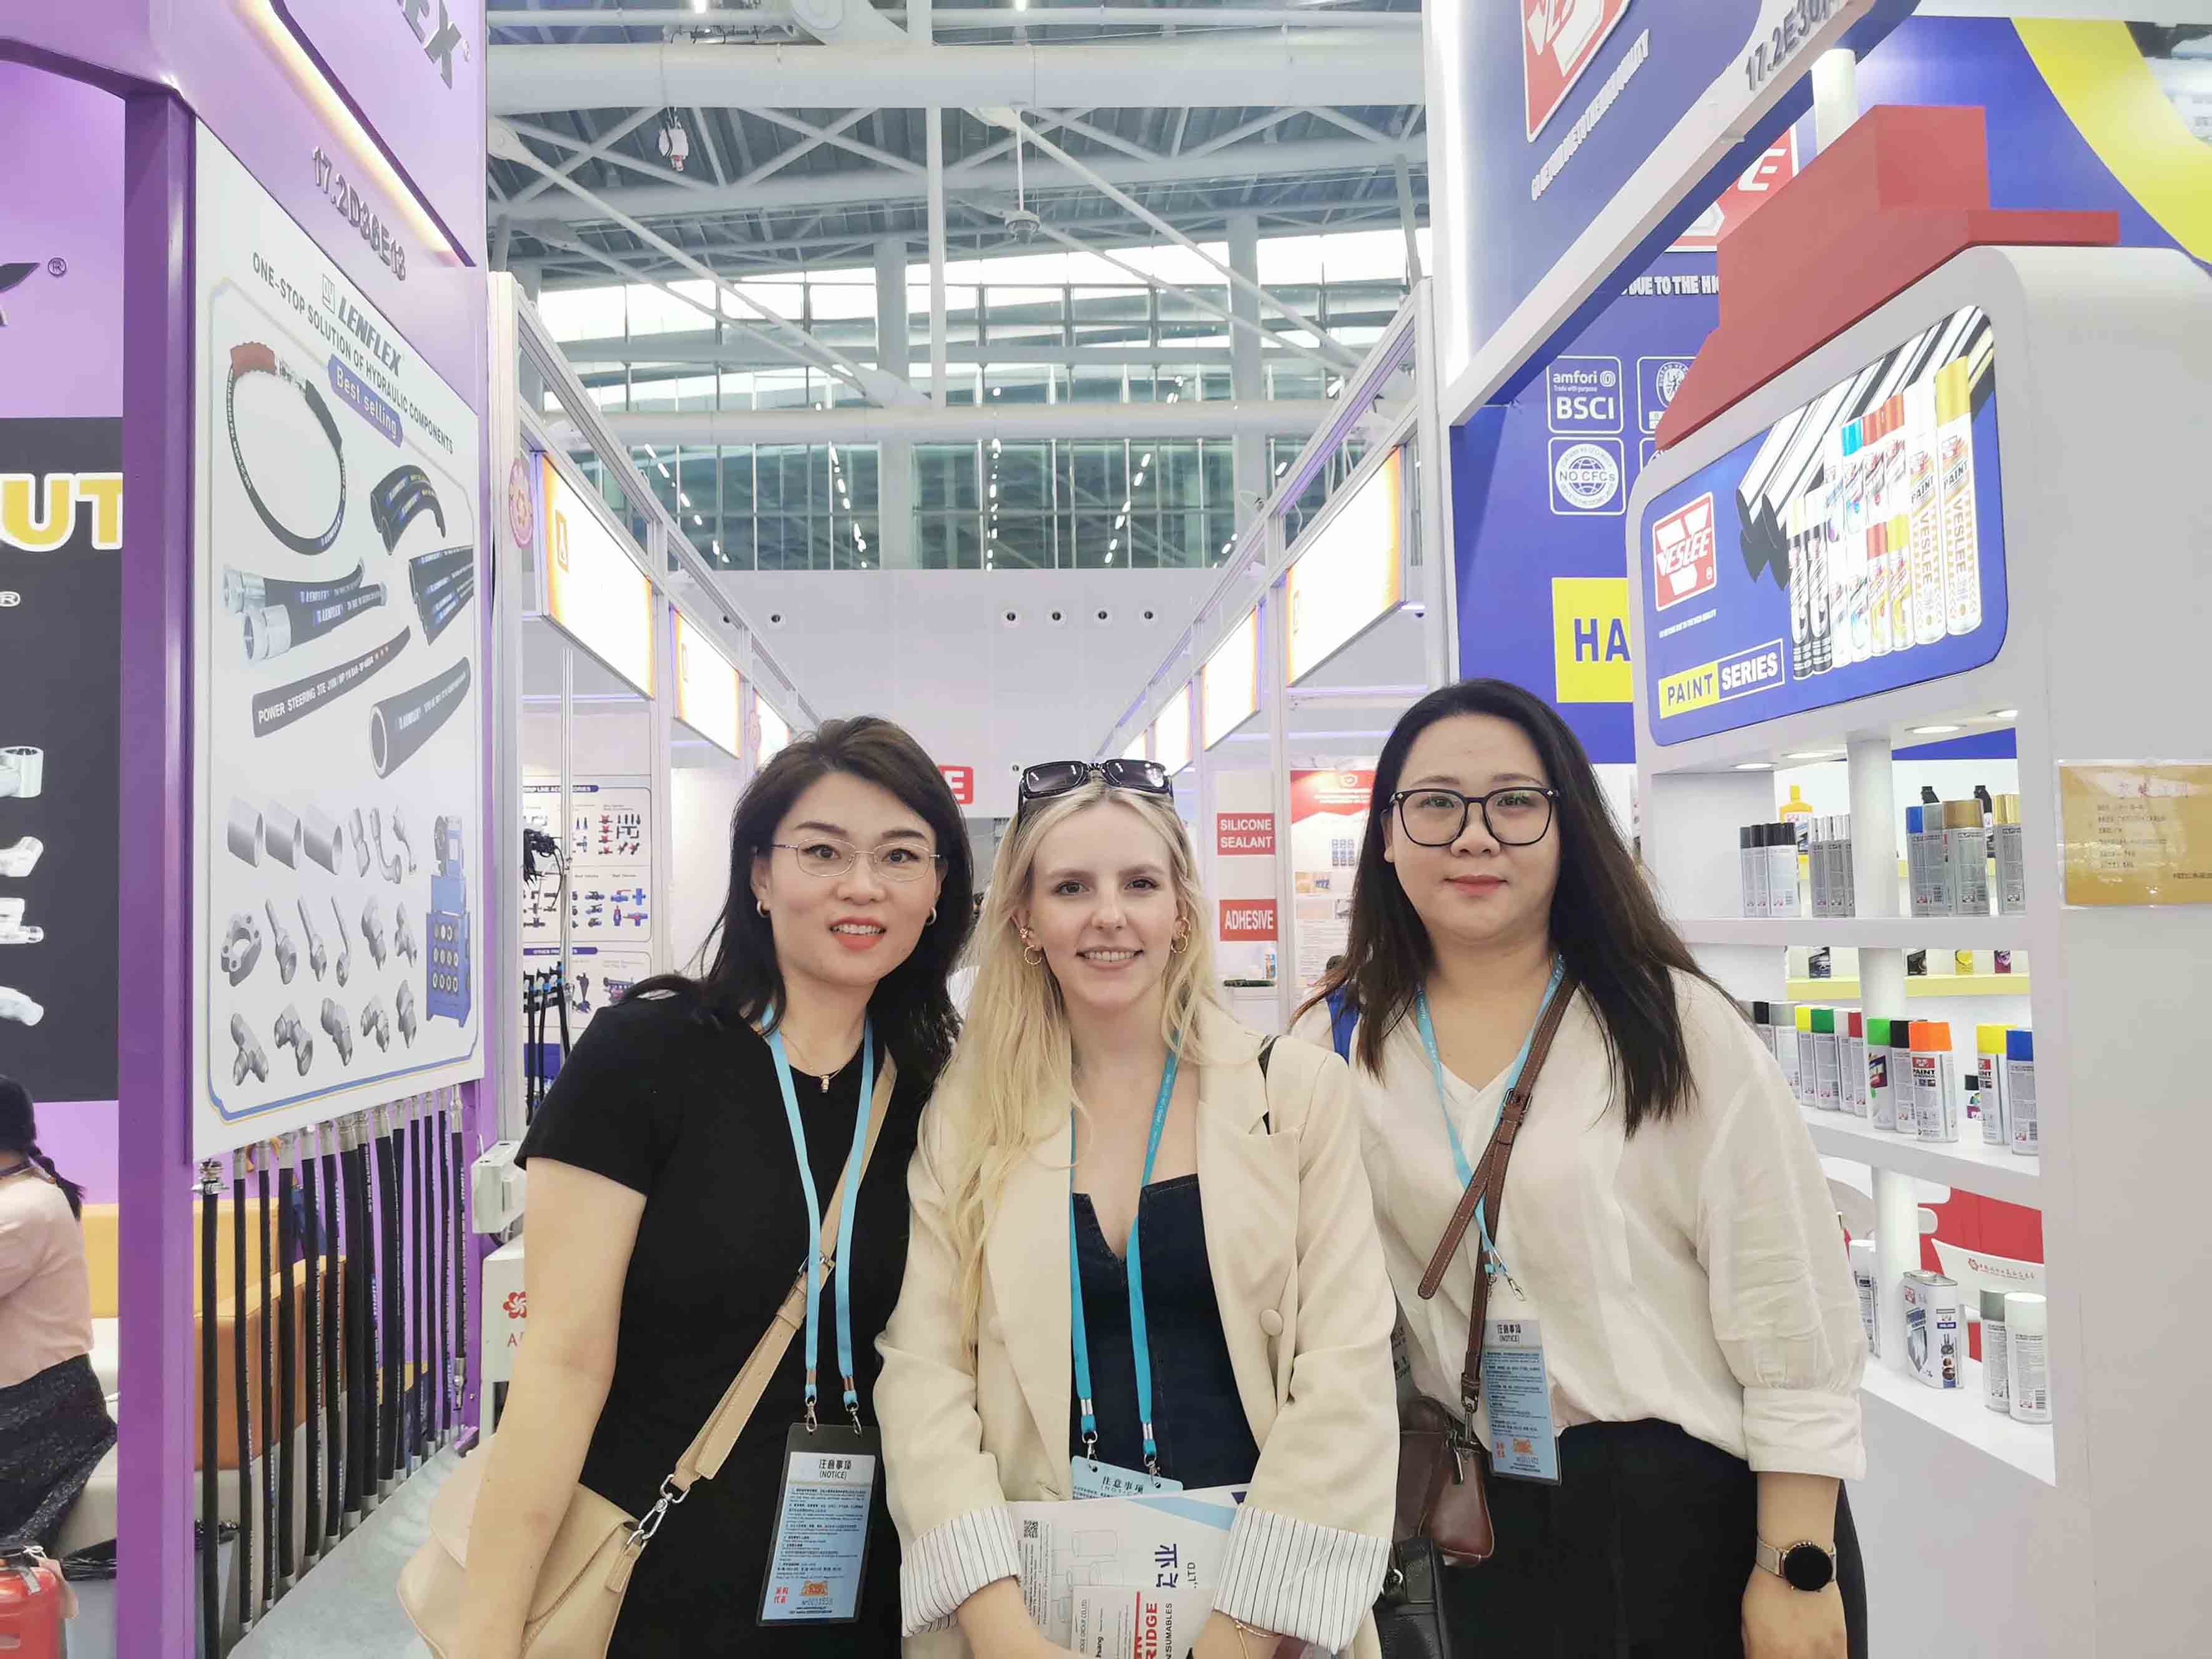 The Canton Fair - A Window for the World to See China